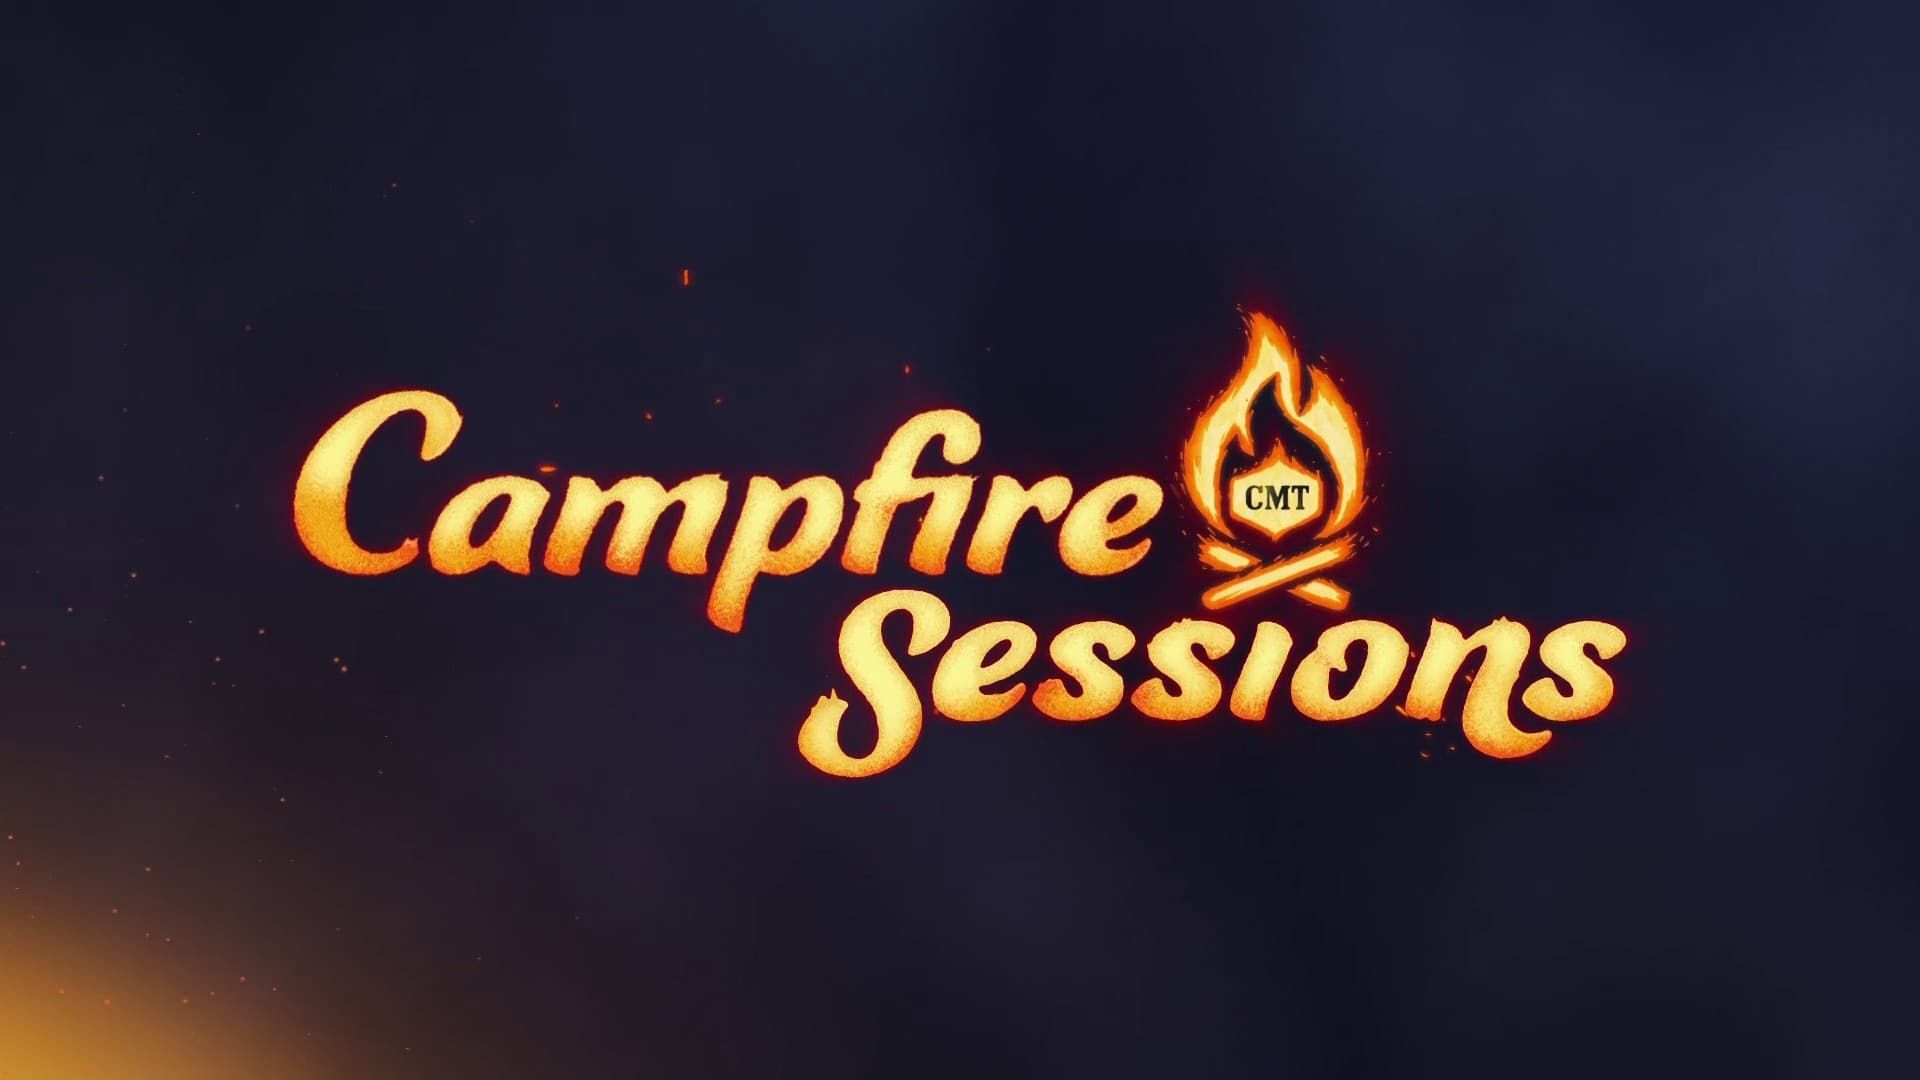 CMT Campfire Sessions background